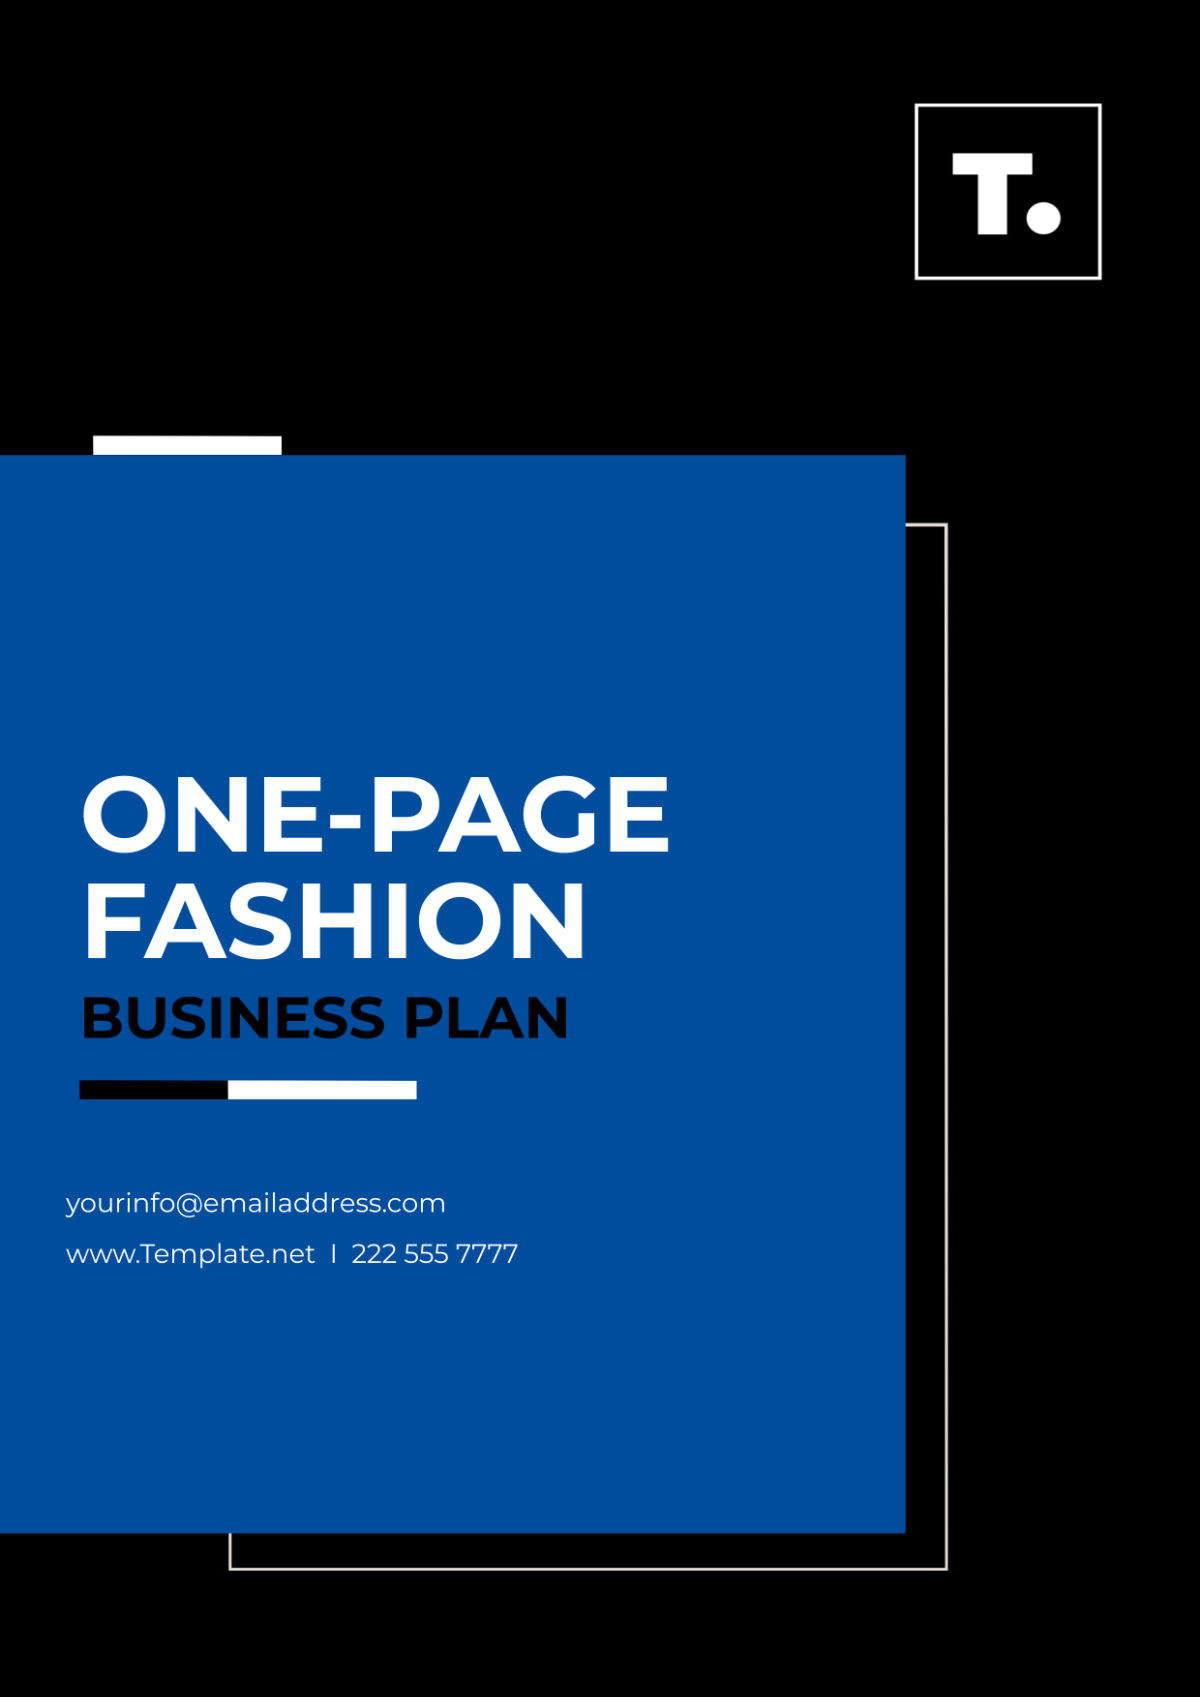 Free One-page Fashion Business Plan Template